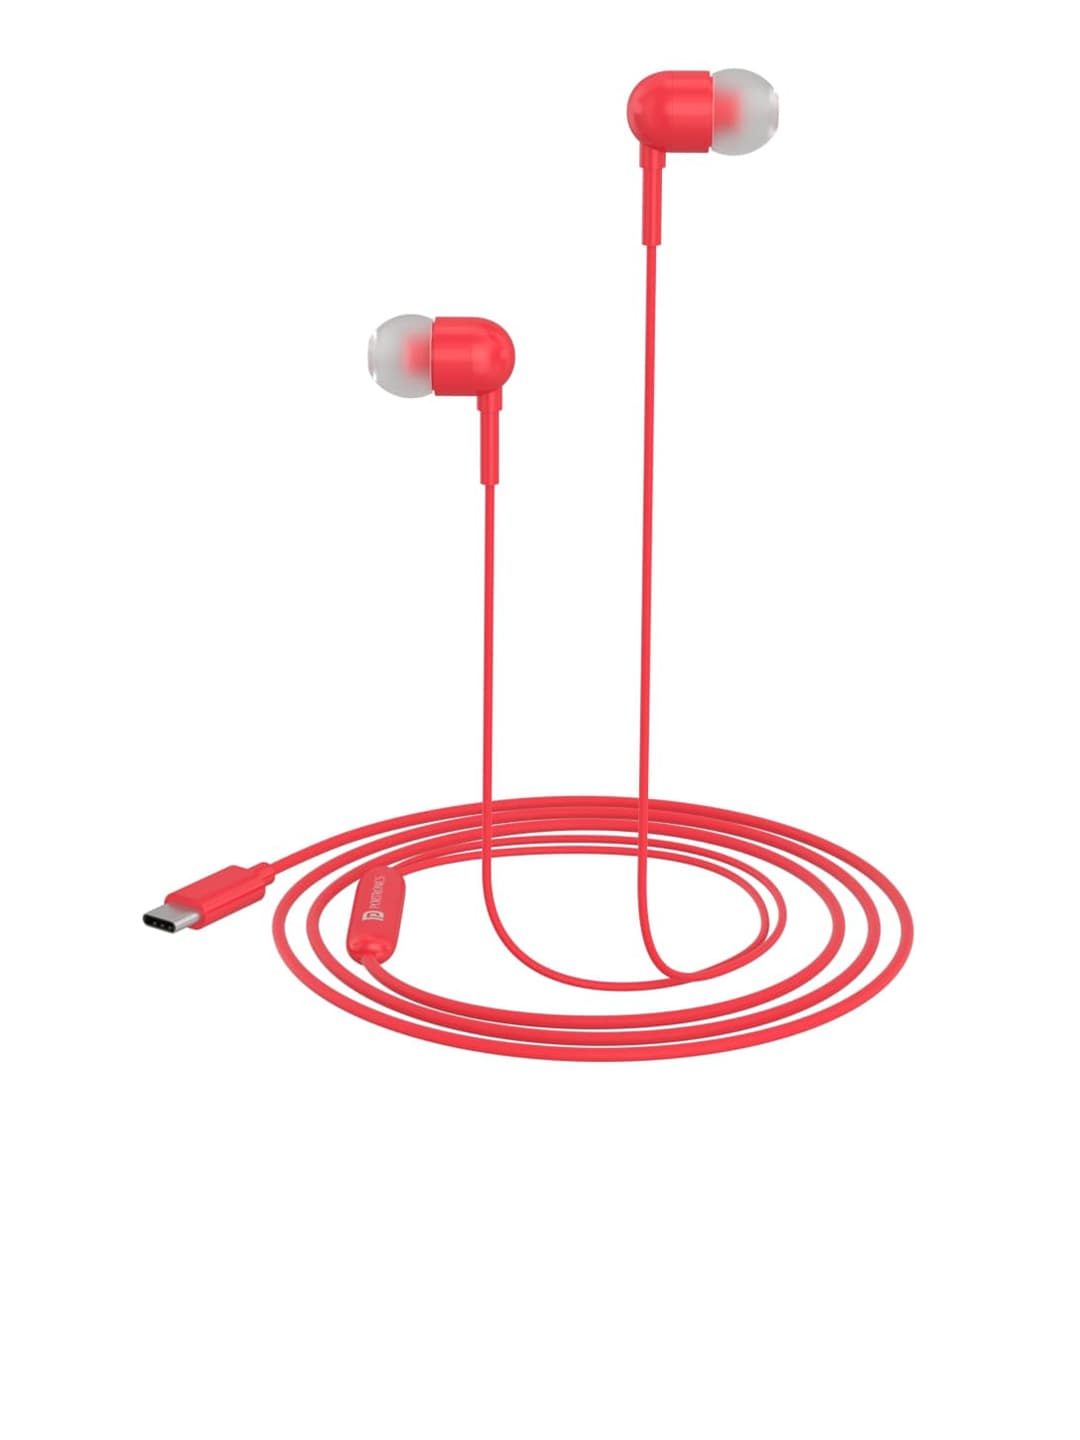 Portronics Red Conch 60 In-Ear Wired Earphone With Mic Price in India